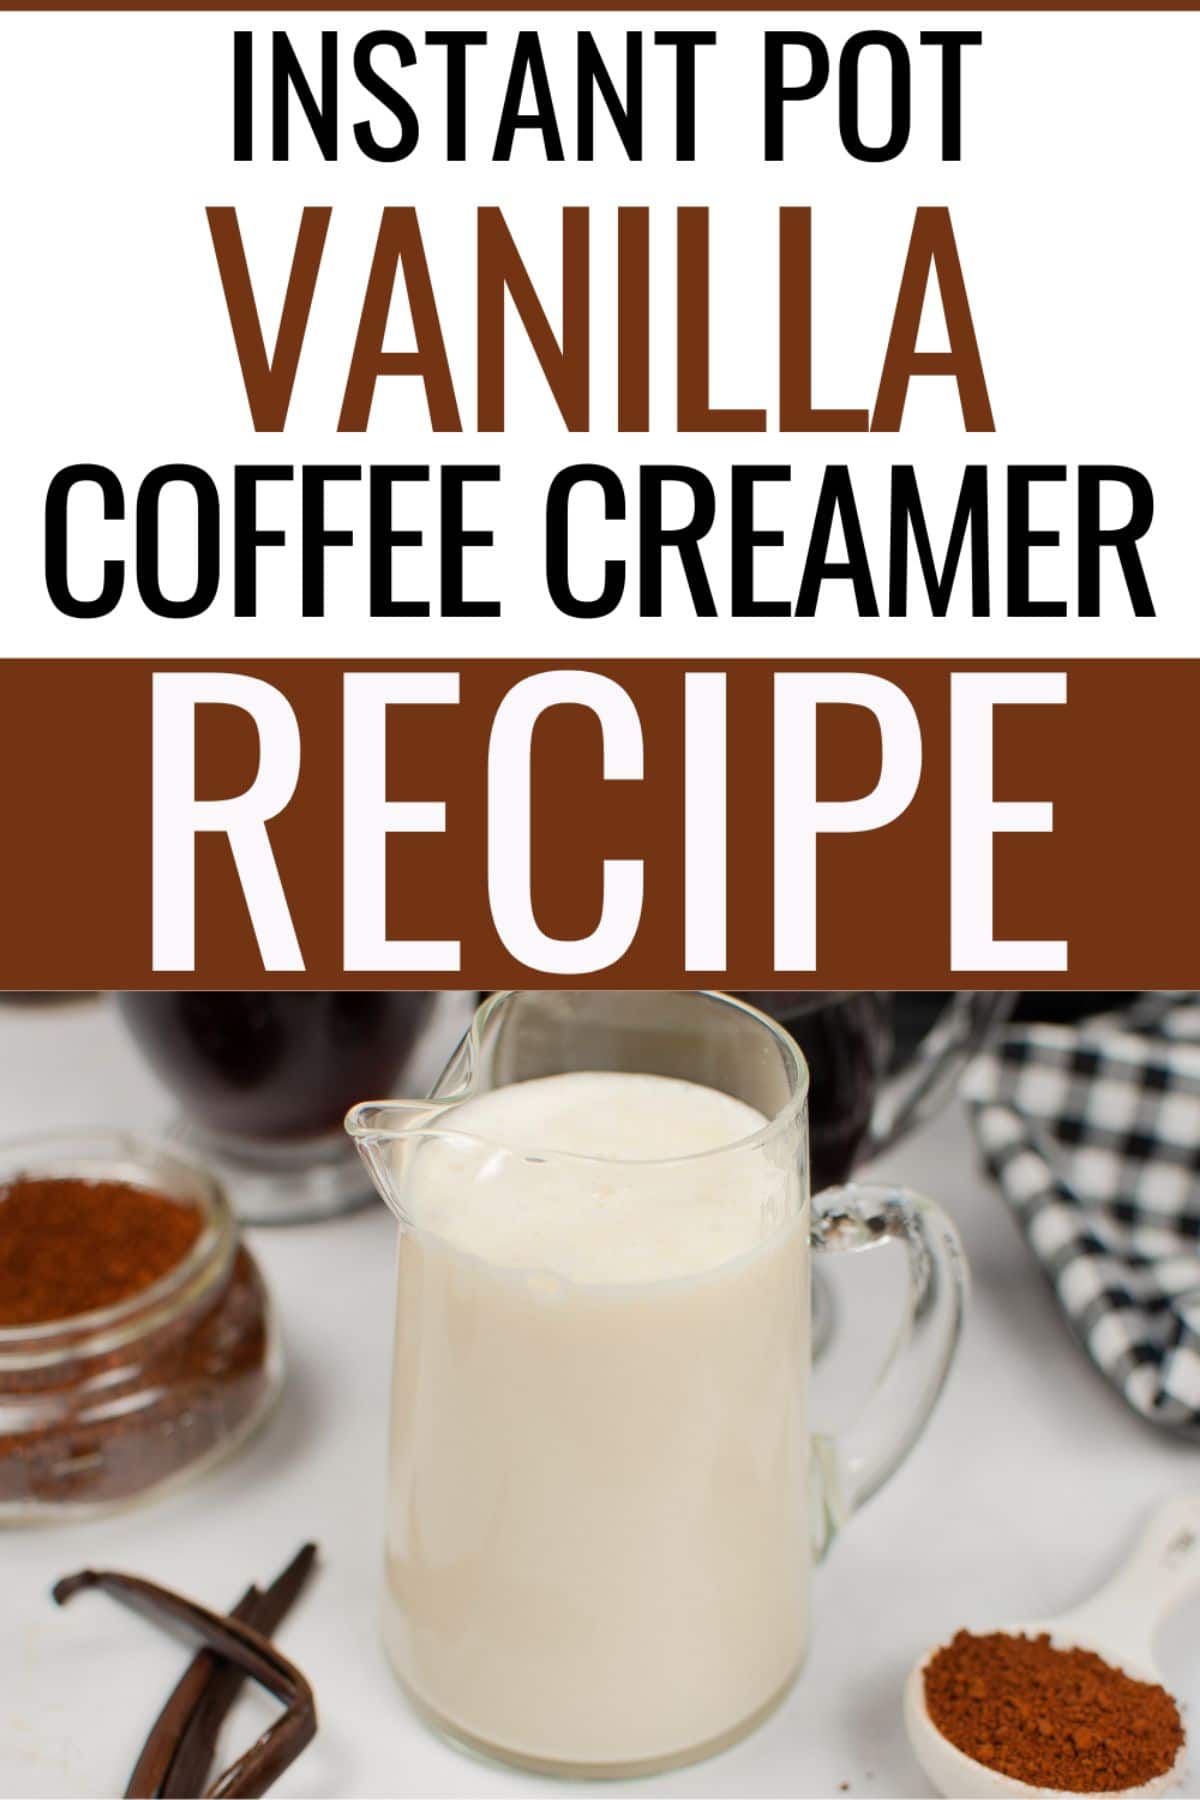 This Instant Pot Vanilla Coffee Creamer is the perfect way to add some creamy flavor to your morning cup of coffee. It's ready in 10 minutes! #instantpot #pressurecooker #coffeecreamer #vanilla #recipe via @wondermomwannab